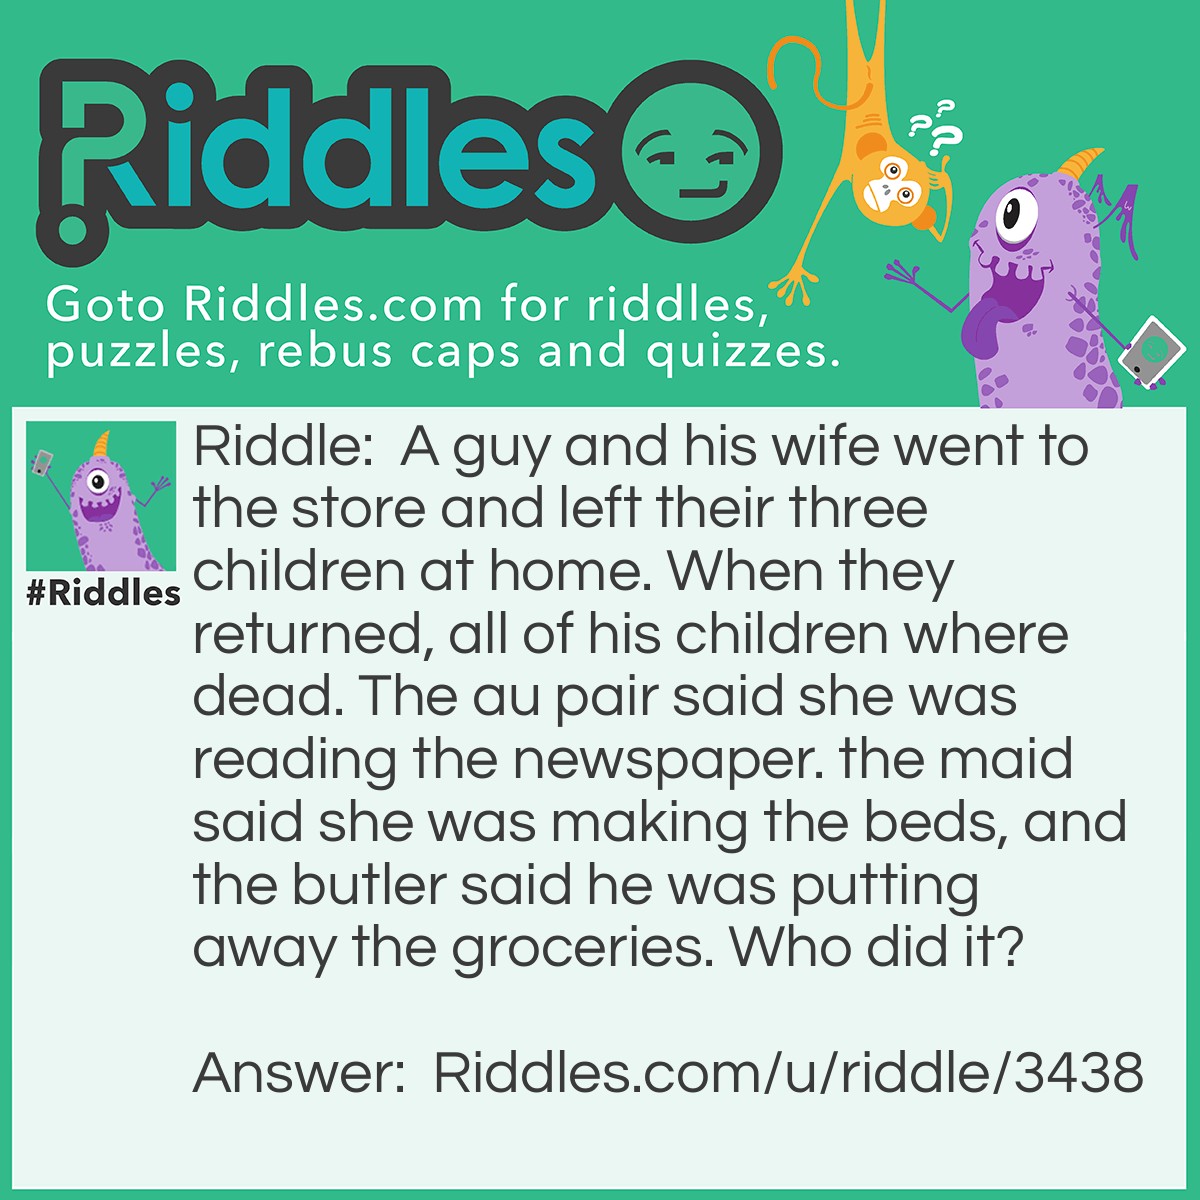 Riddle: A guy and his wife went to the store and left their three children at home. When they returned, all of his children where dead. The au pair said she was reading the newspaper. the maid said she was making the beds, and the butler said he was putting away the groceries. Who did it? Answer: The butler because the parents went to the store to get the groceries. Therefore, they were out of groceries and there was none to put away.